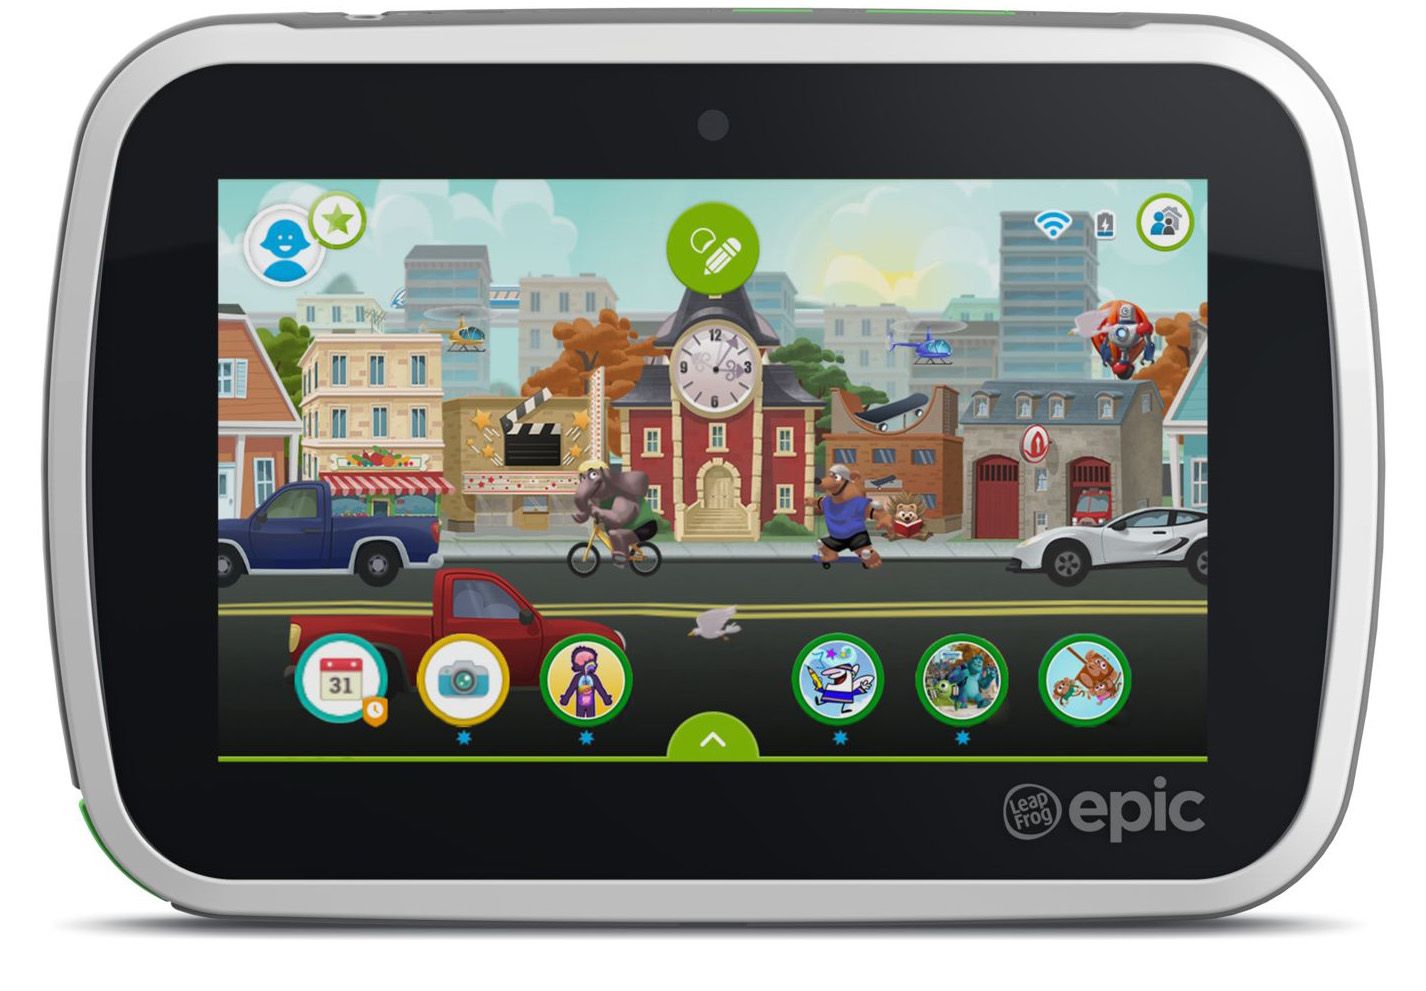 leapfrog takes the amazon fire hd kids edition head on with the epic android tablet for little’uns image 1